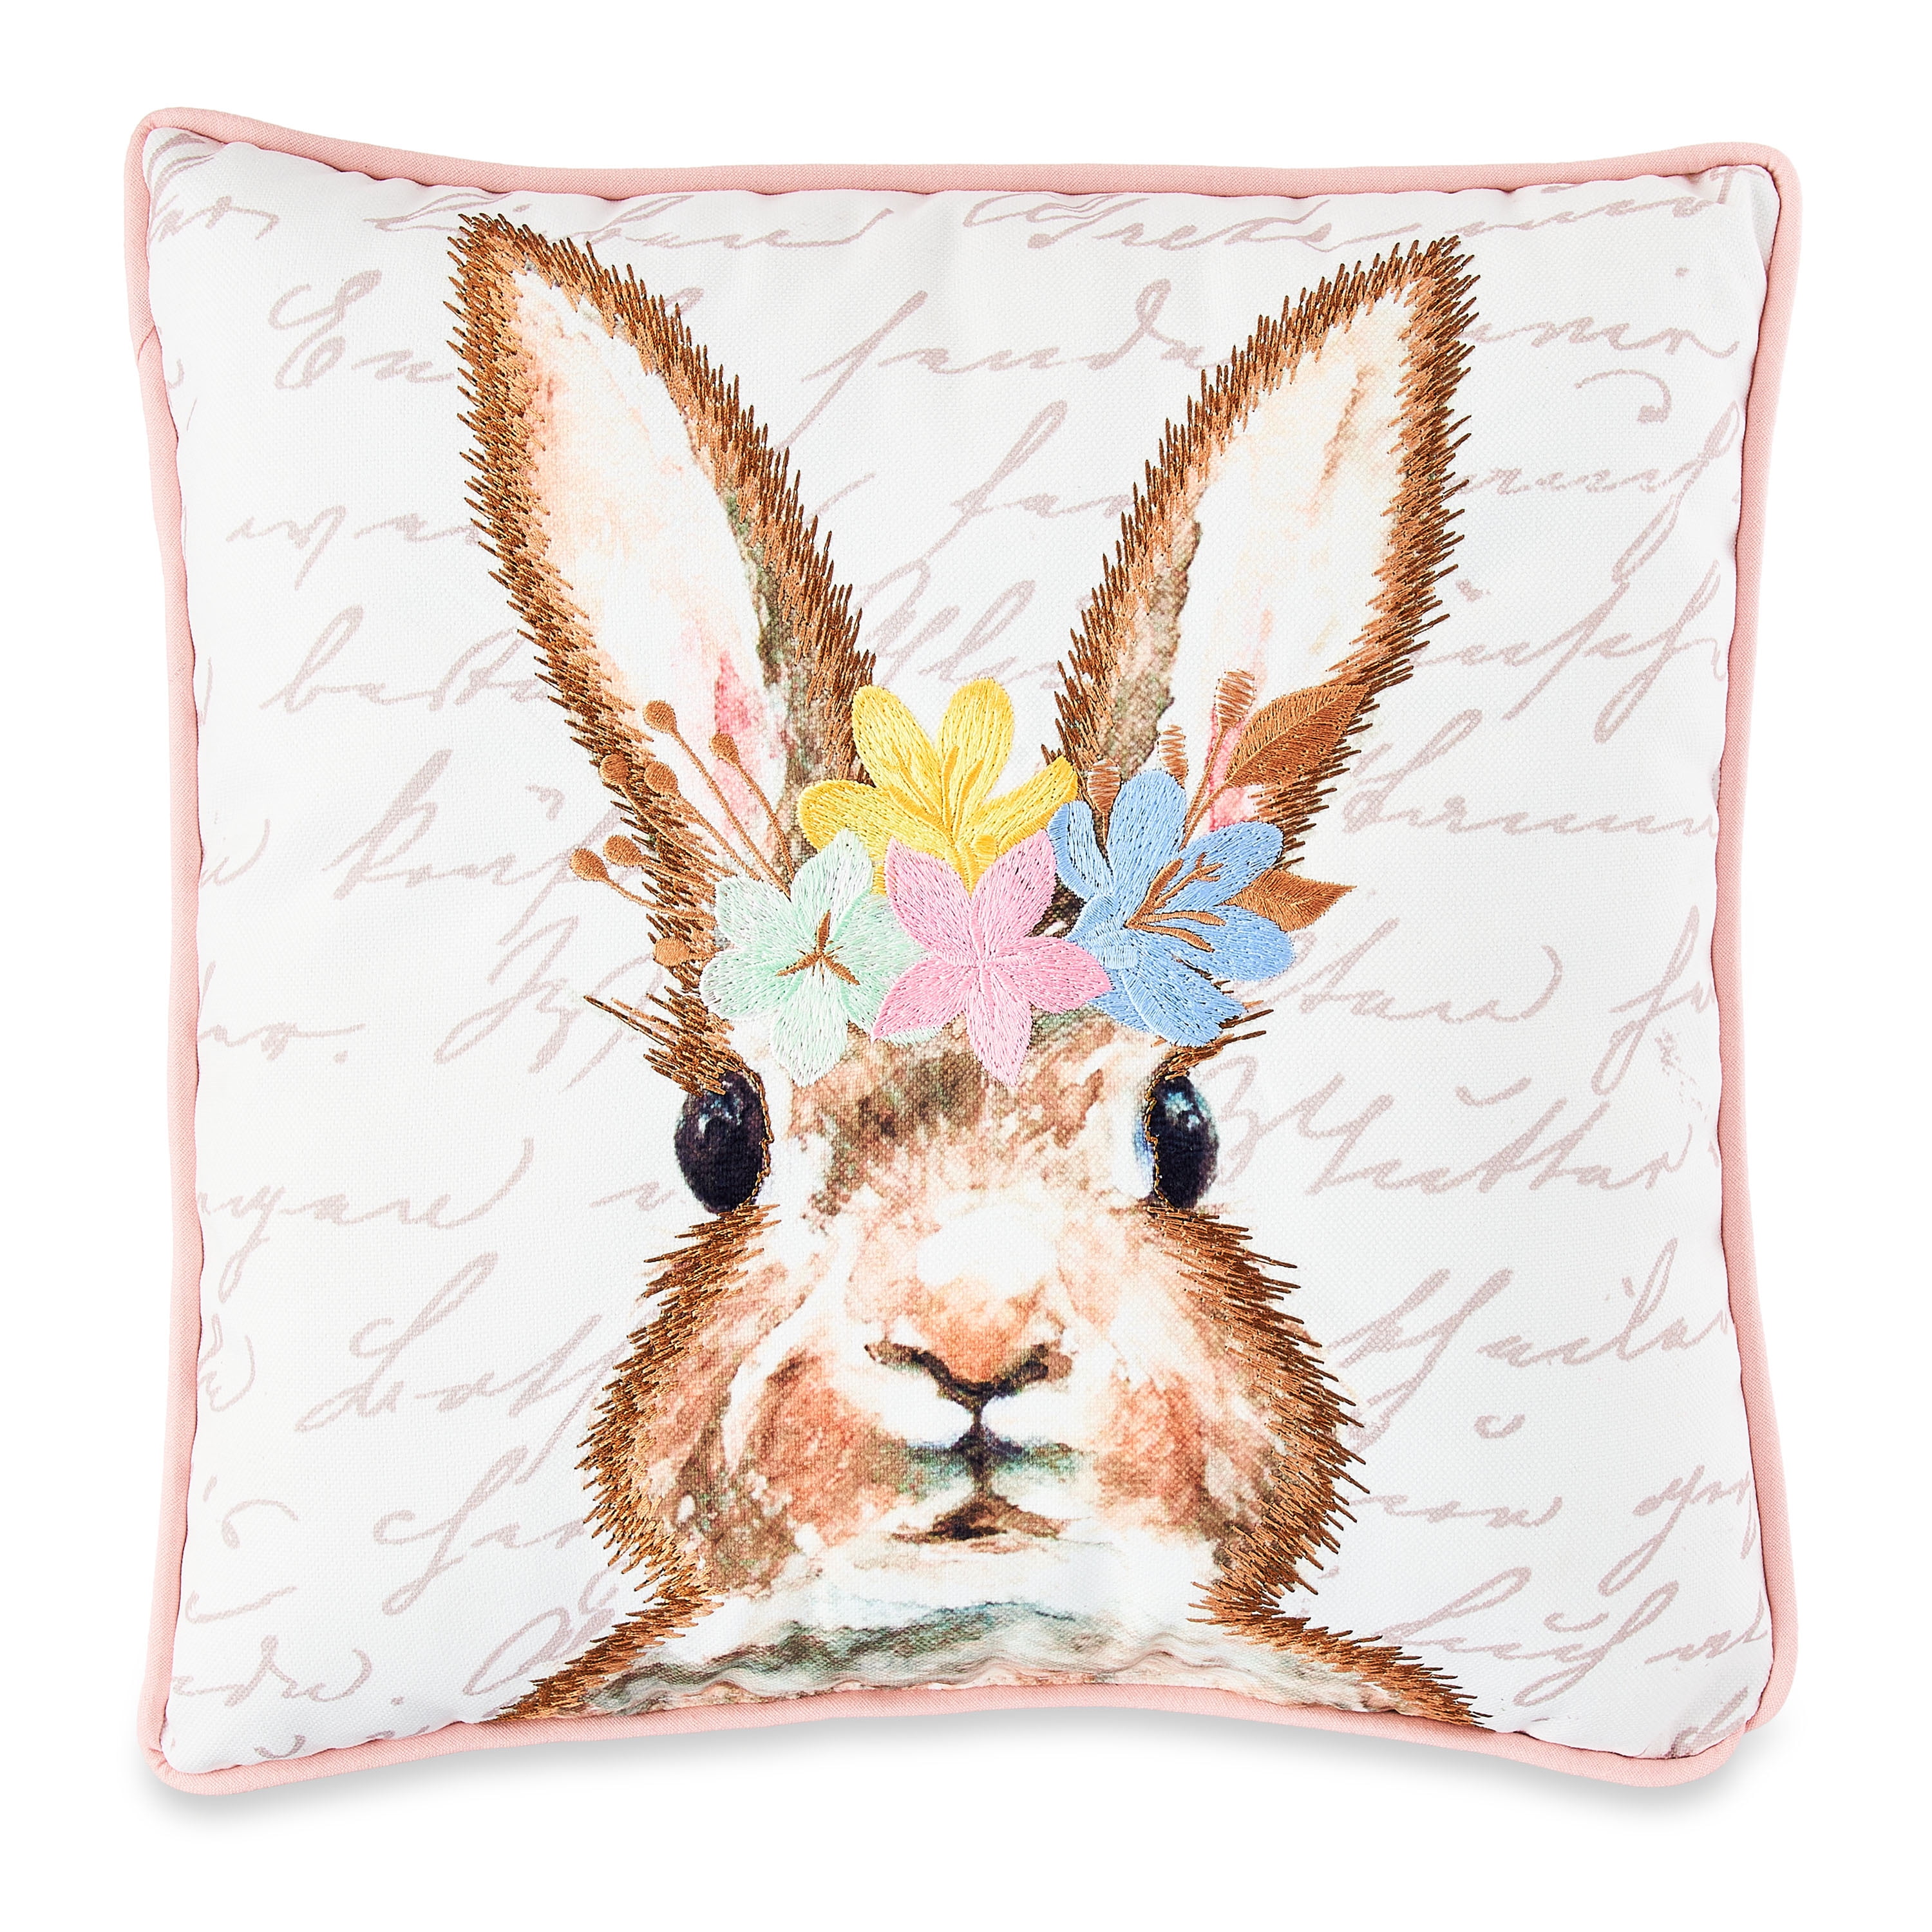 WAY TO CELEBRATE! Way To Celebrate Easter Square Bunny Face Decorative Pillow, 14" x 14"